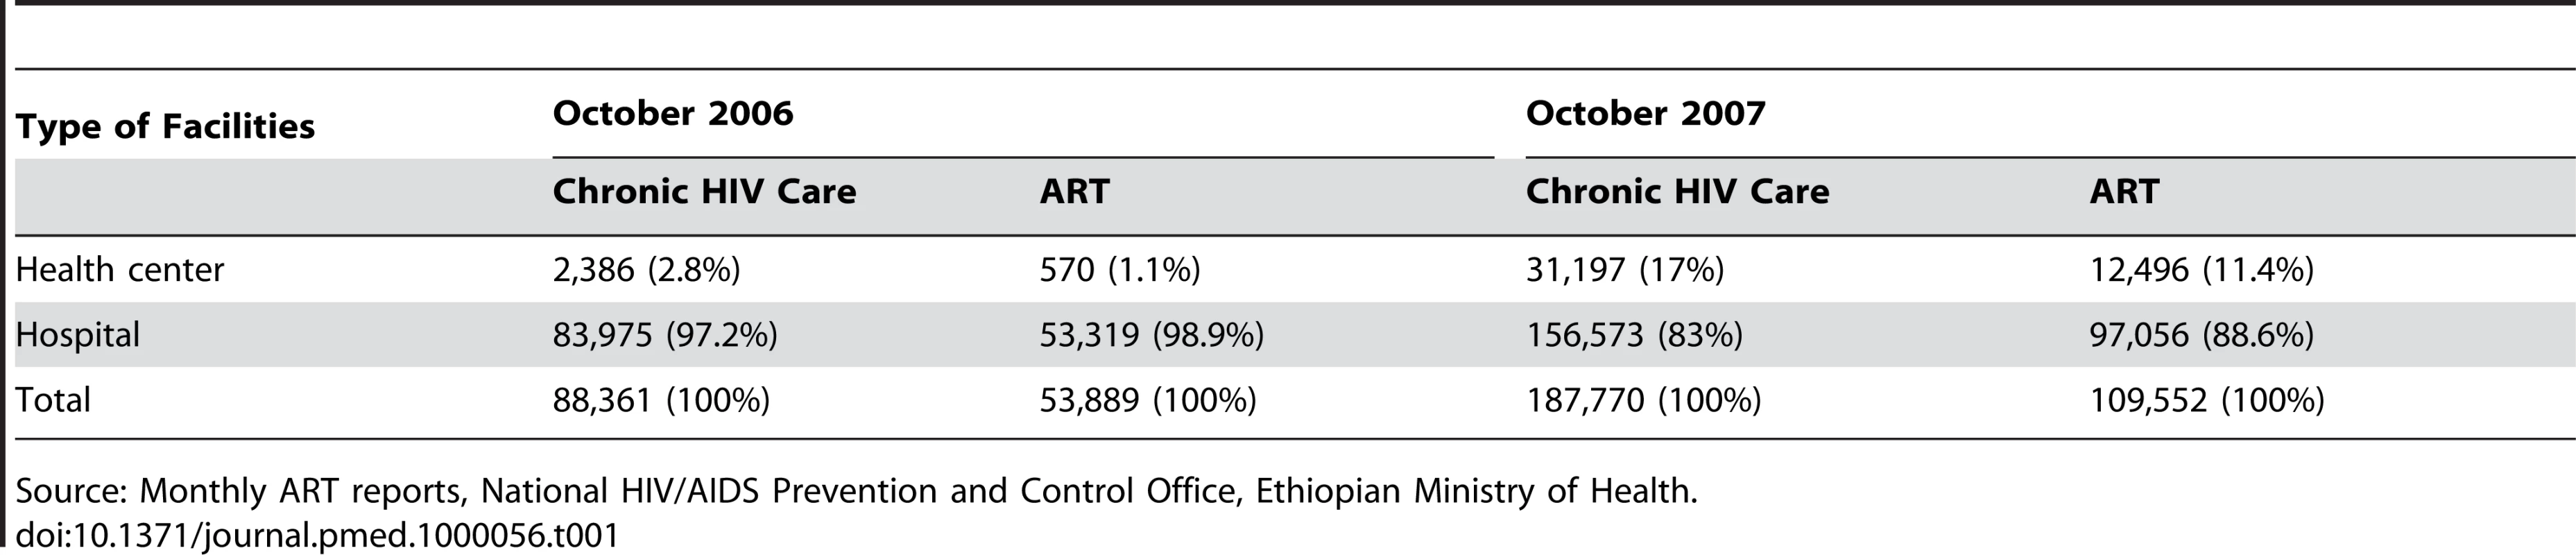 Decentralization of ART and chronic HIV care in Ethiopia, October 2006 and October 2007.